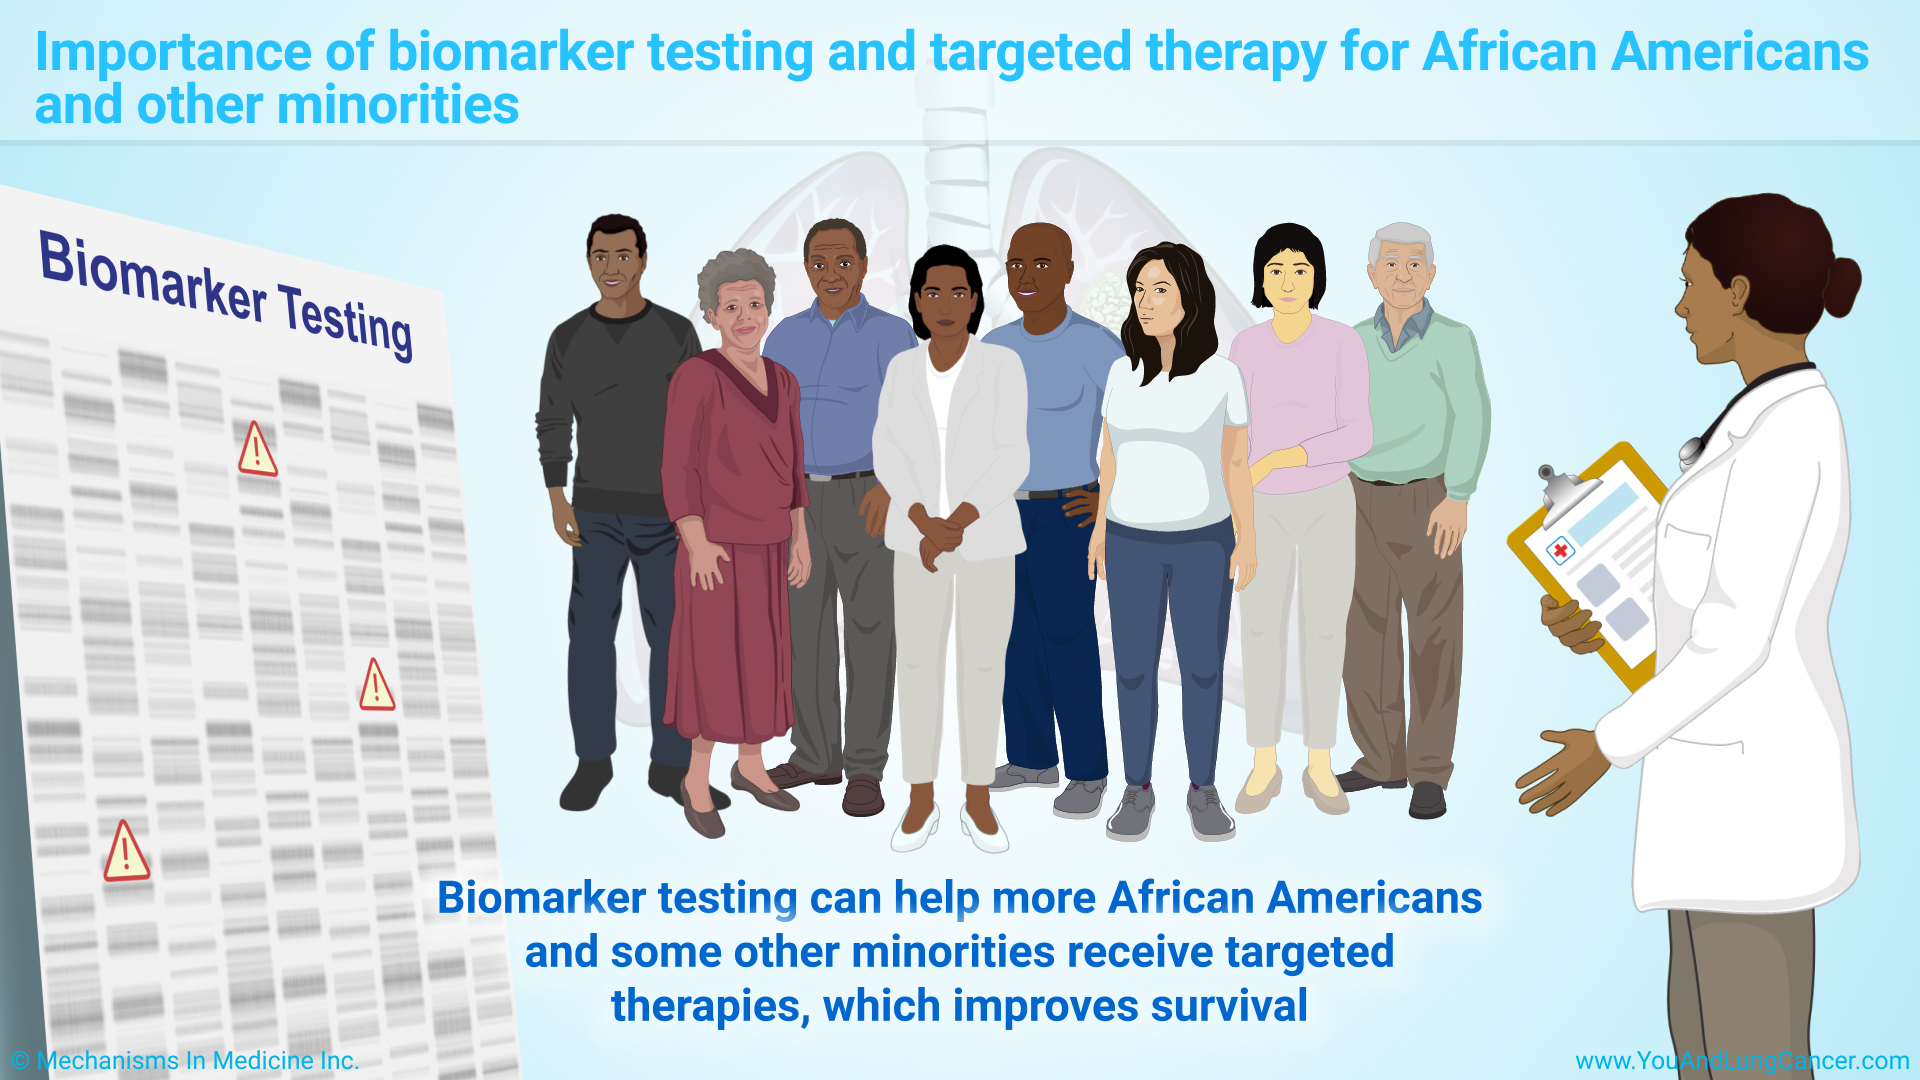 Importance of biomarker testing and targeted therapy for African Americans and other minorities